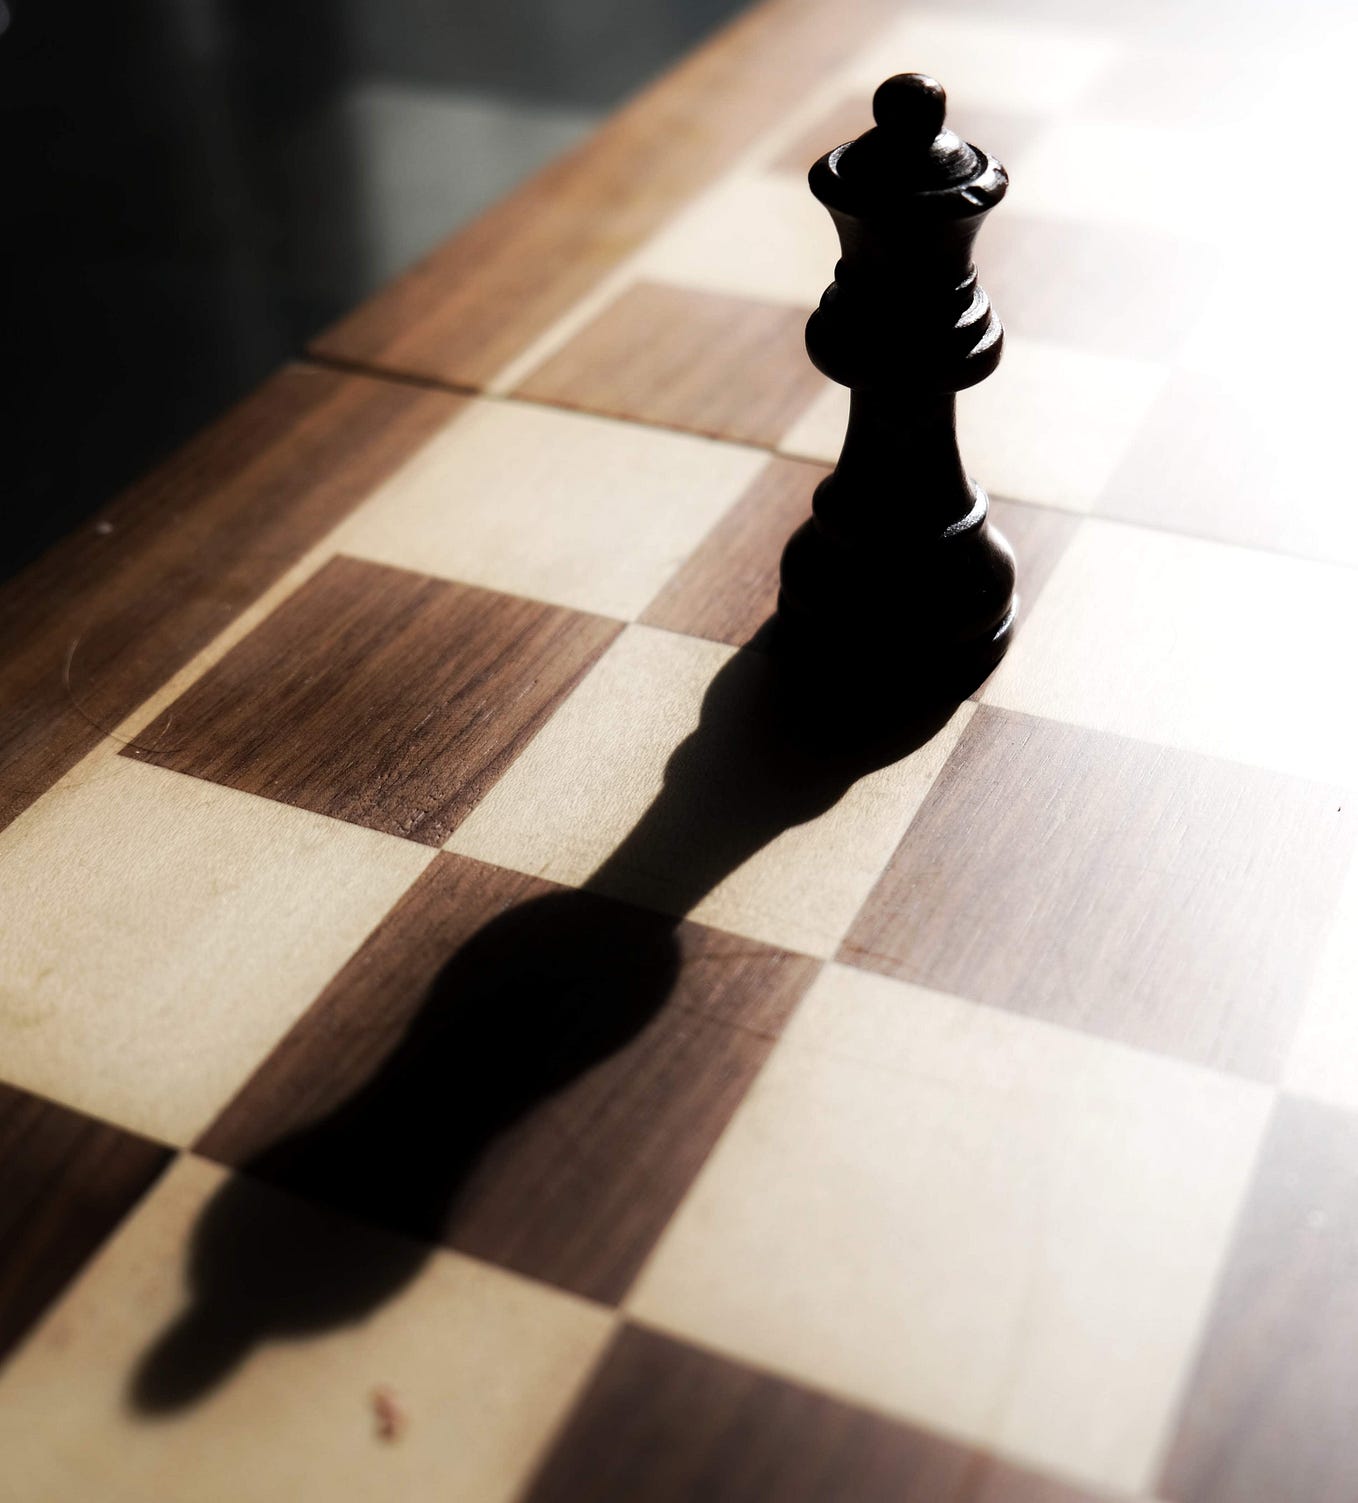 Image of a queen chess piece on a chessboard.